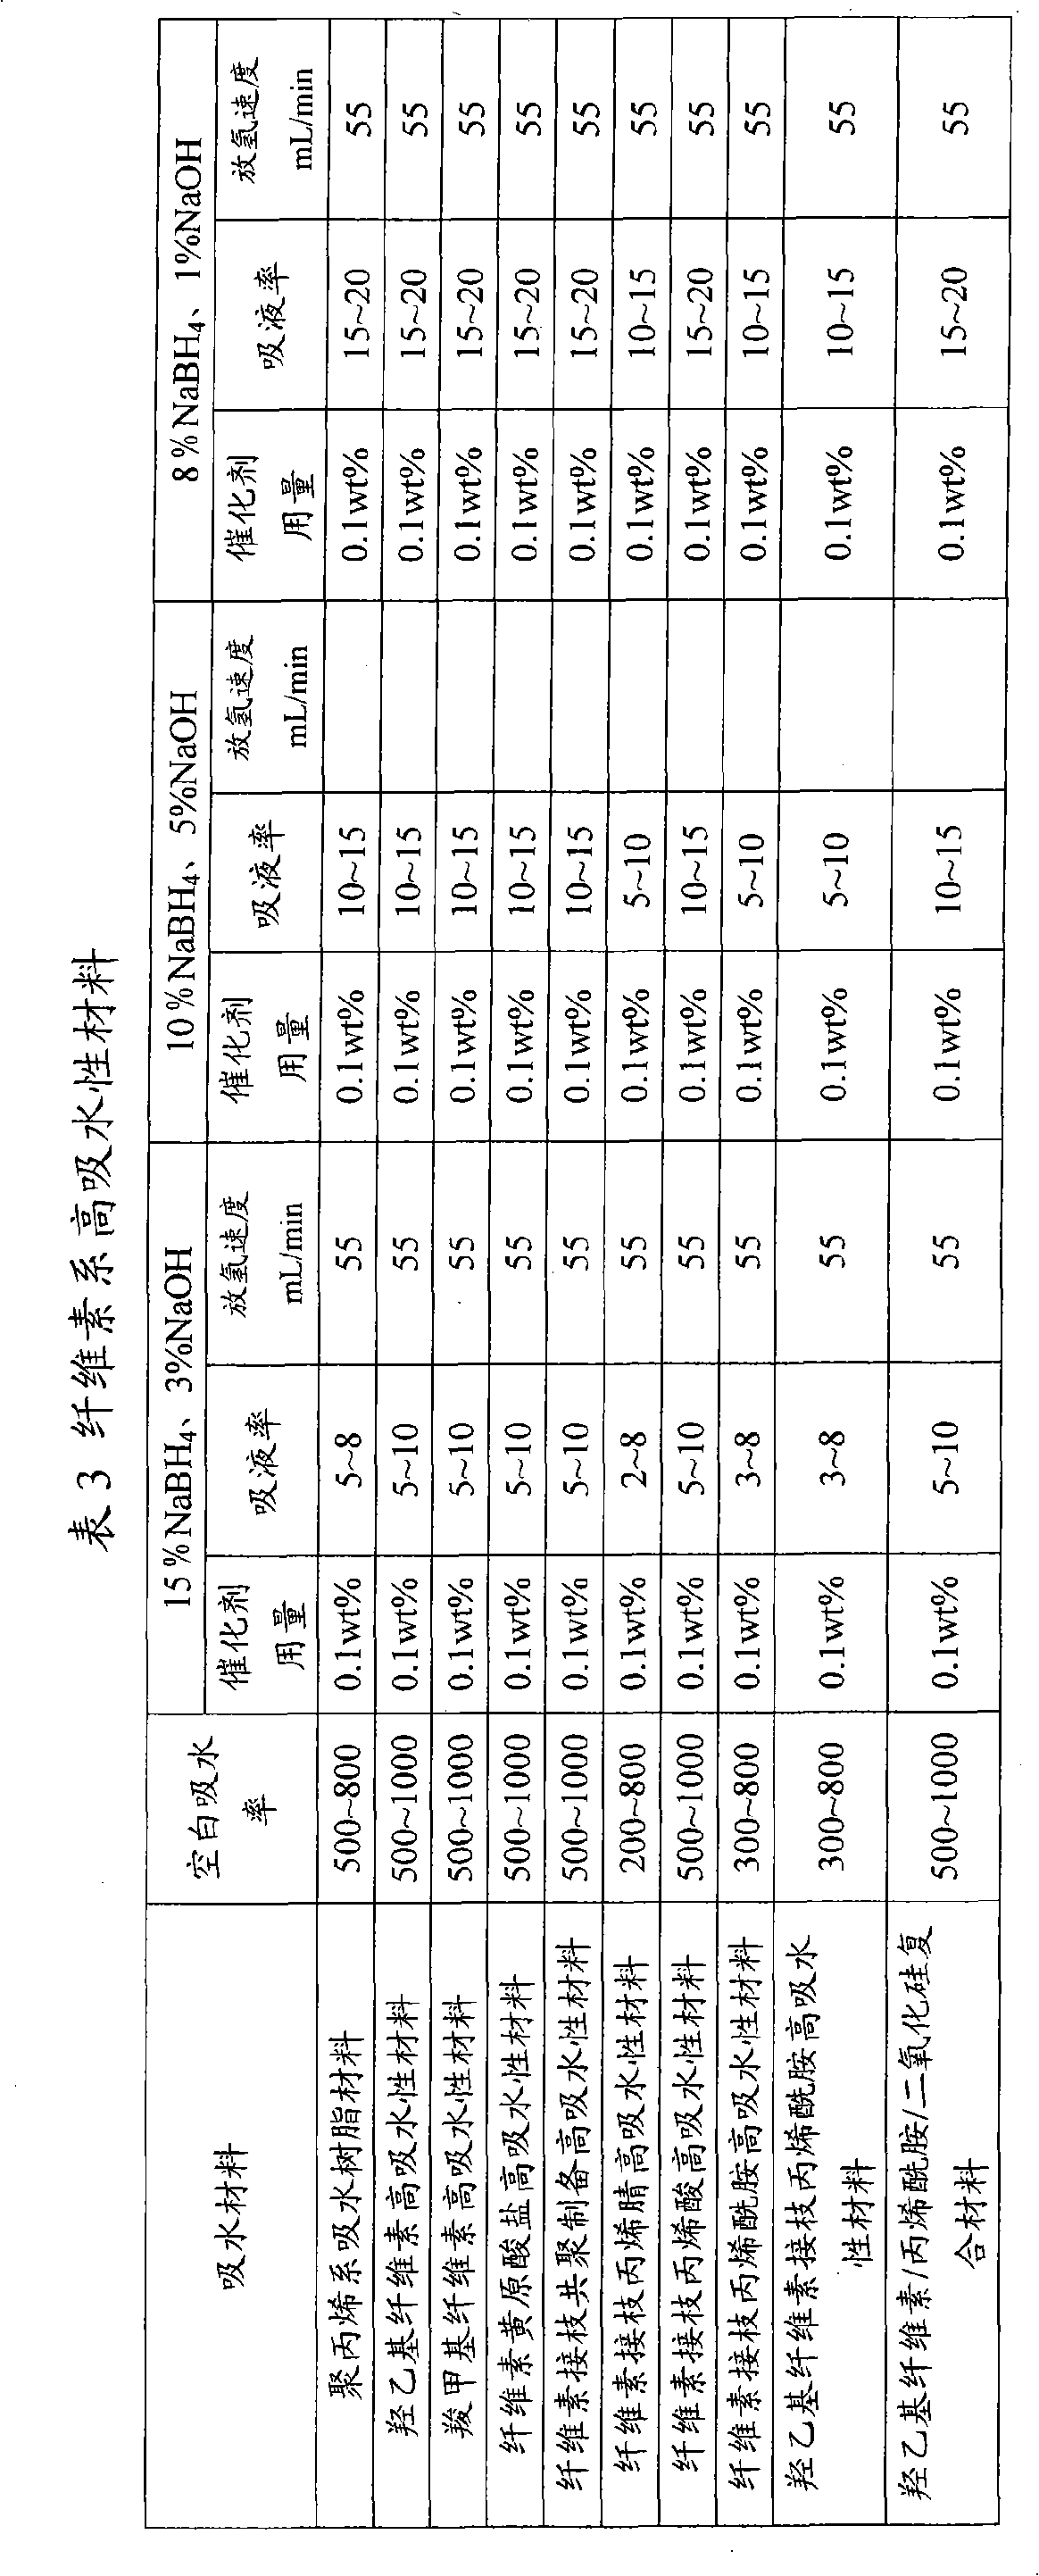 Hydrogen storage material, preparation and use thereof